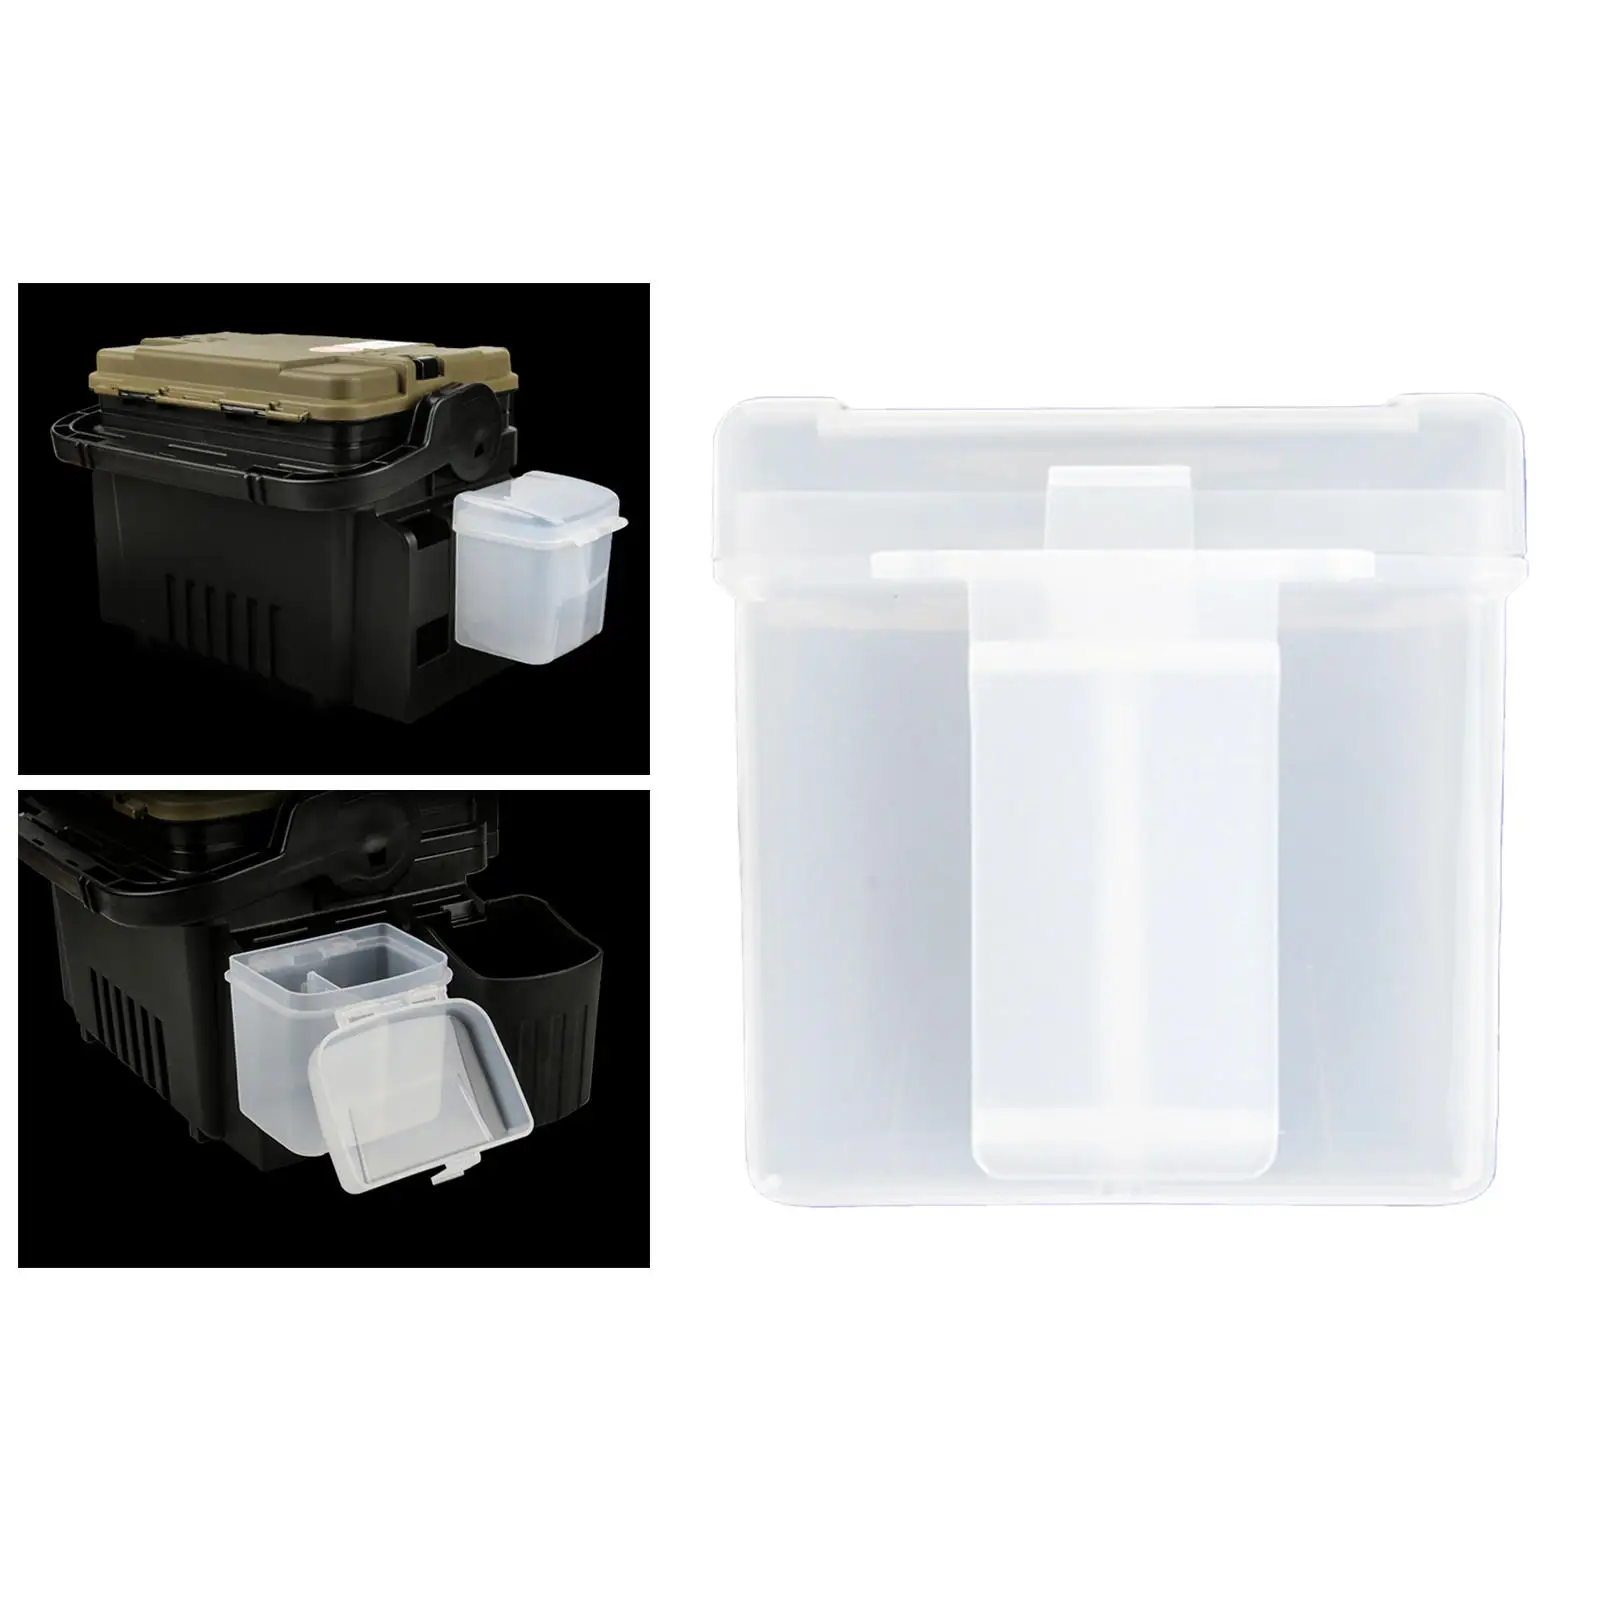 Portable Clear Plastic Fishing Bait Tackle Box Storage Case Hanger Container